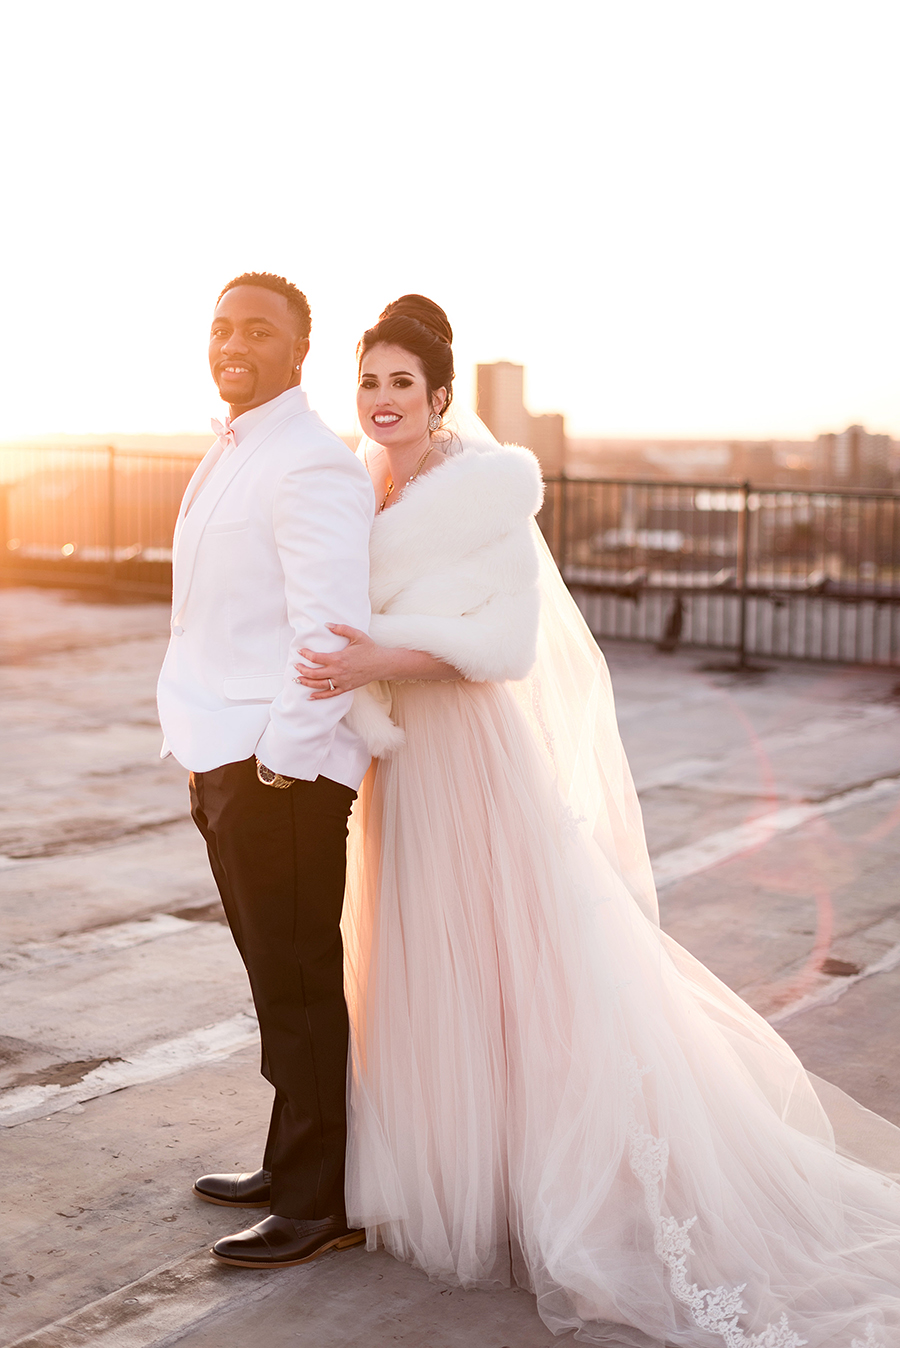 Bride & Groom Portraits on NEO Rooftop at Sunset by Ashley Fisher Photography